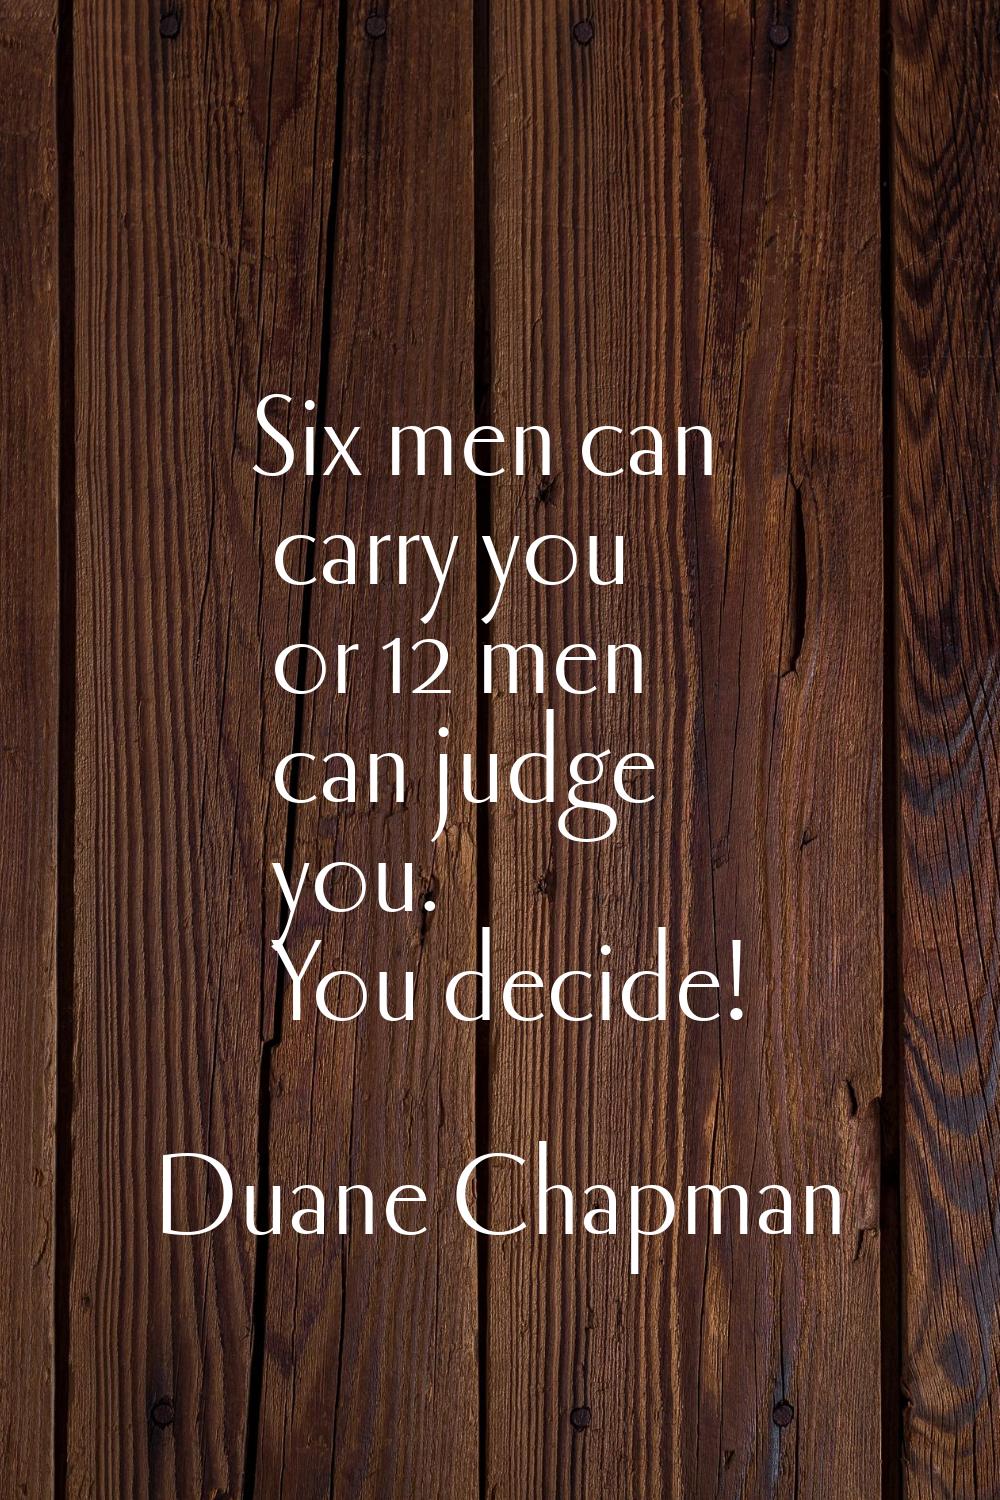 Six men can carry you or 12 men can judge you. You decide!